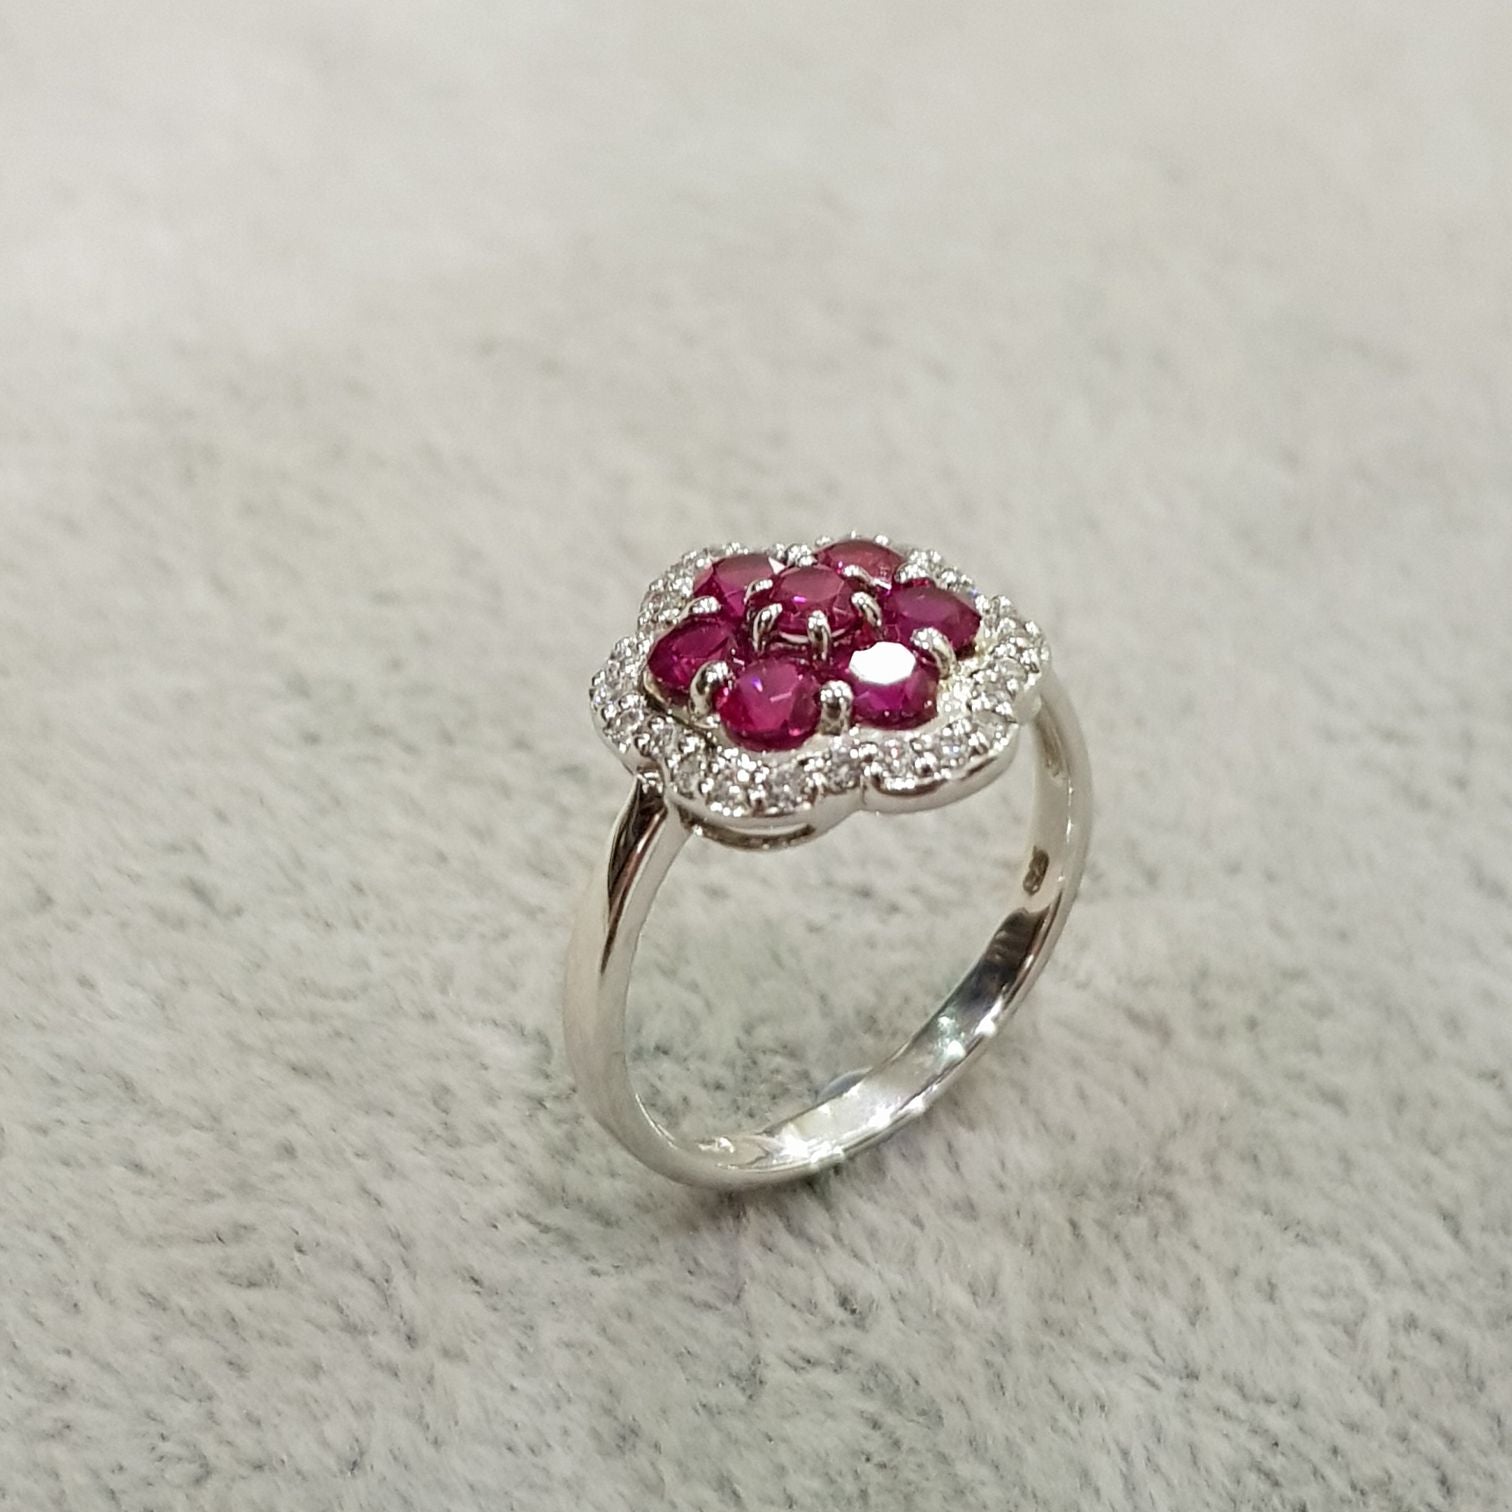 Beautiful Floral Ruby Ring